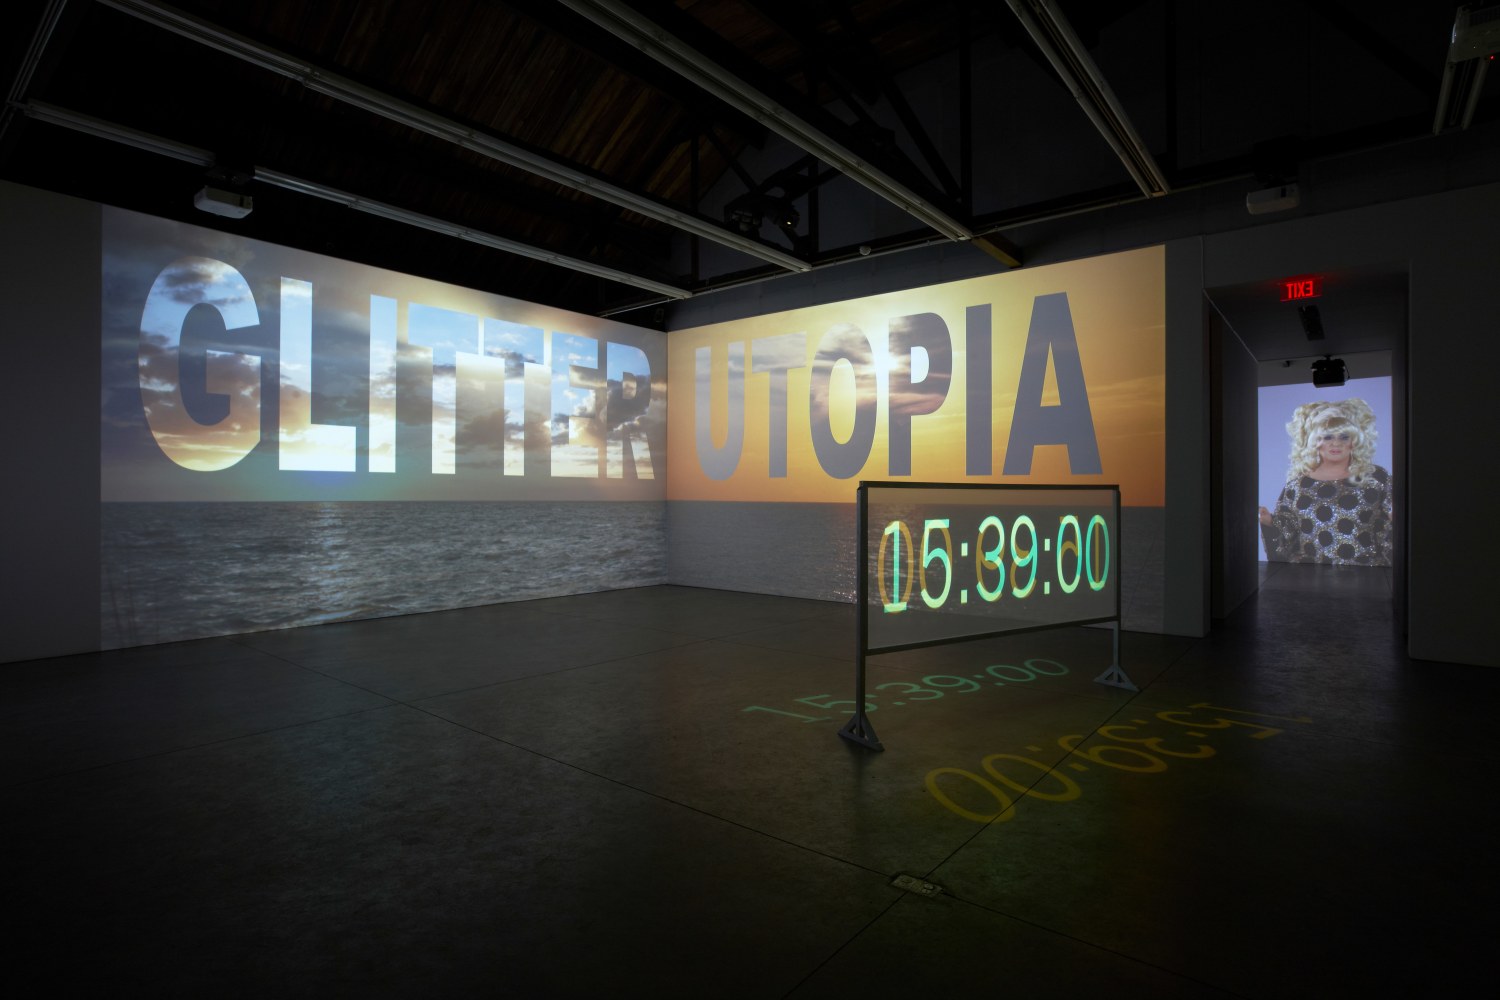 Charles Atlas
The Waning of Justice, 2015
Multi-channel video installation with sound
Duration: 23 minutes, 44 seconds
Edition of 5 plus 2 artist&amp;rsquo;s proof

Installation view, Luhring Augustine,&amp;nbsp;February 7 &amp;ndash; March 14, 2015